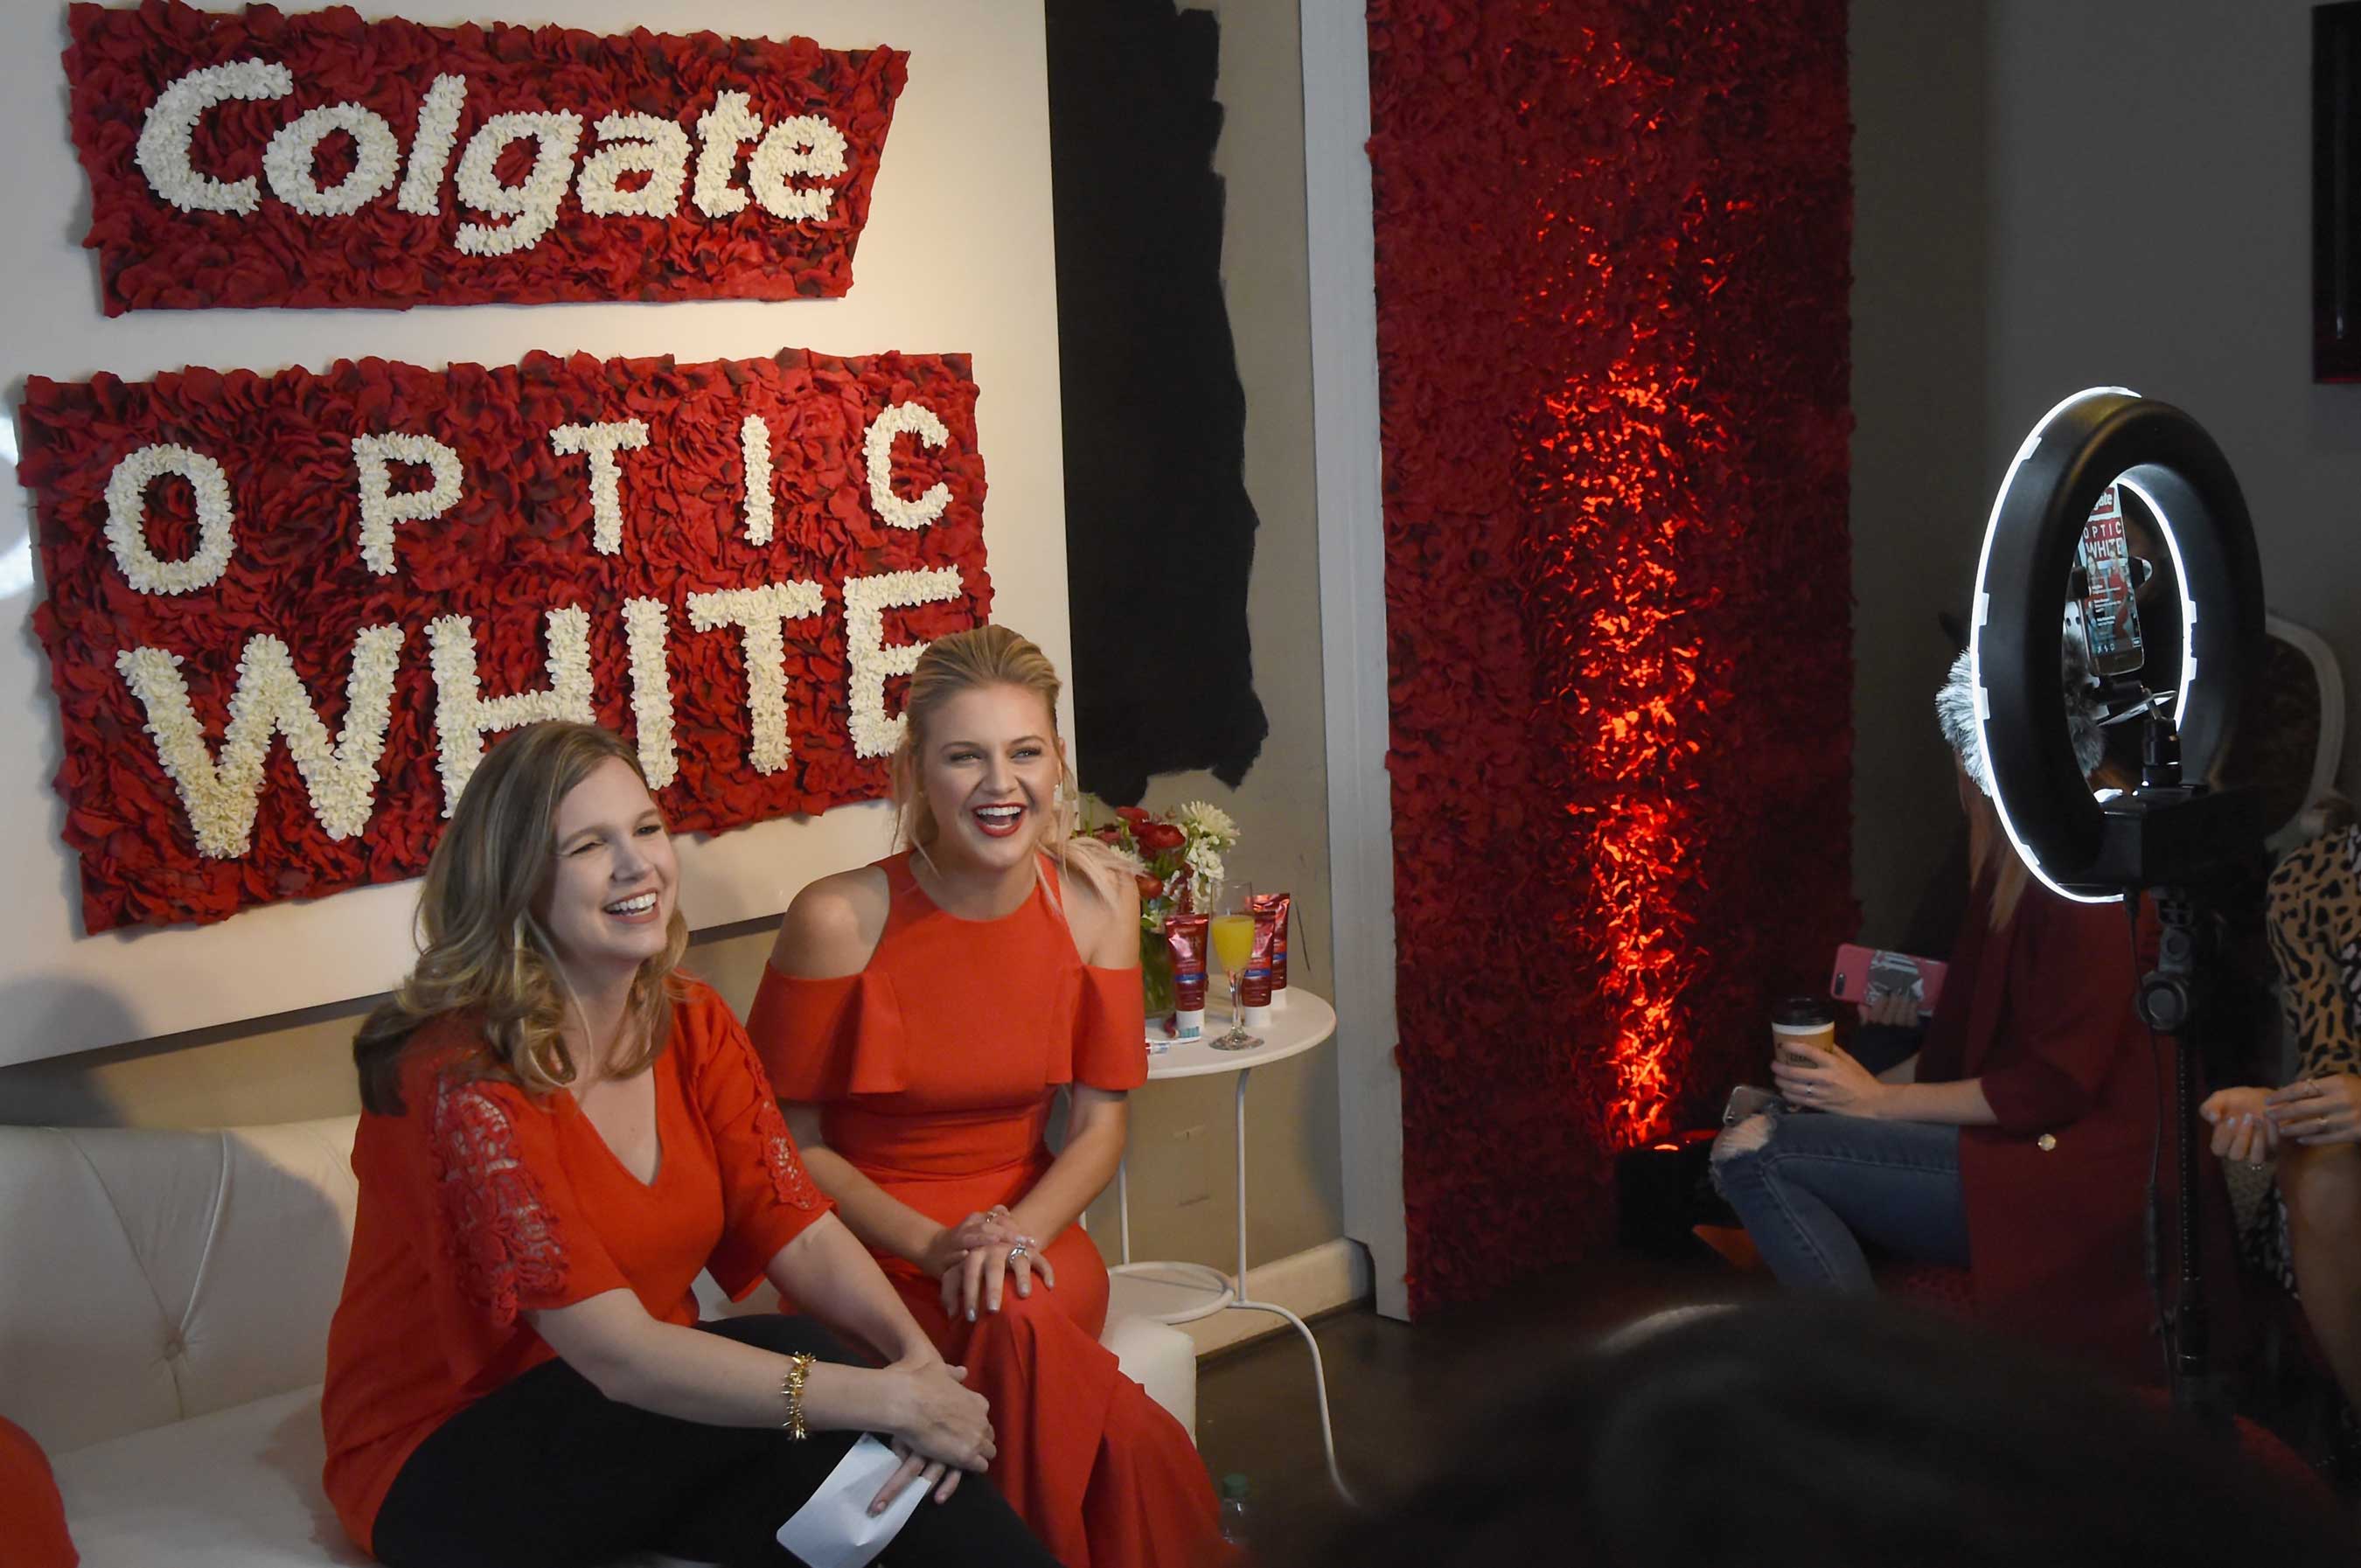 Fans can get the inside scoop on Kelsea Ballerini’s CMA Awards routine, her favorite everyday essentials and more by following @OpticWhite on Twitter and Instagram.